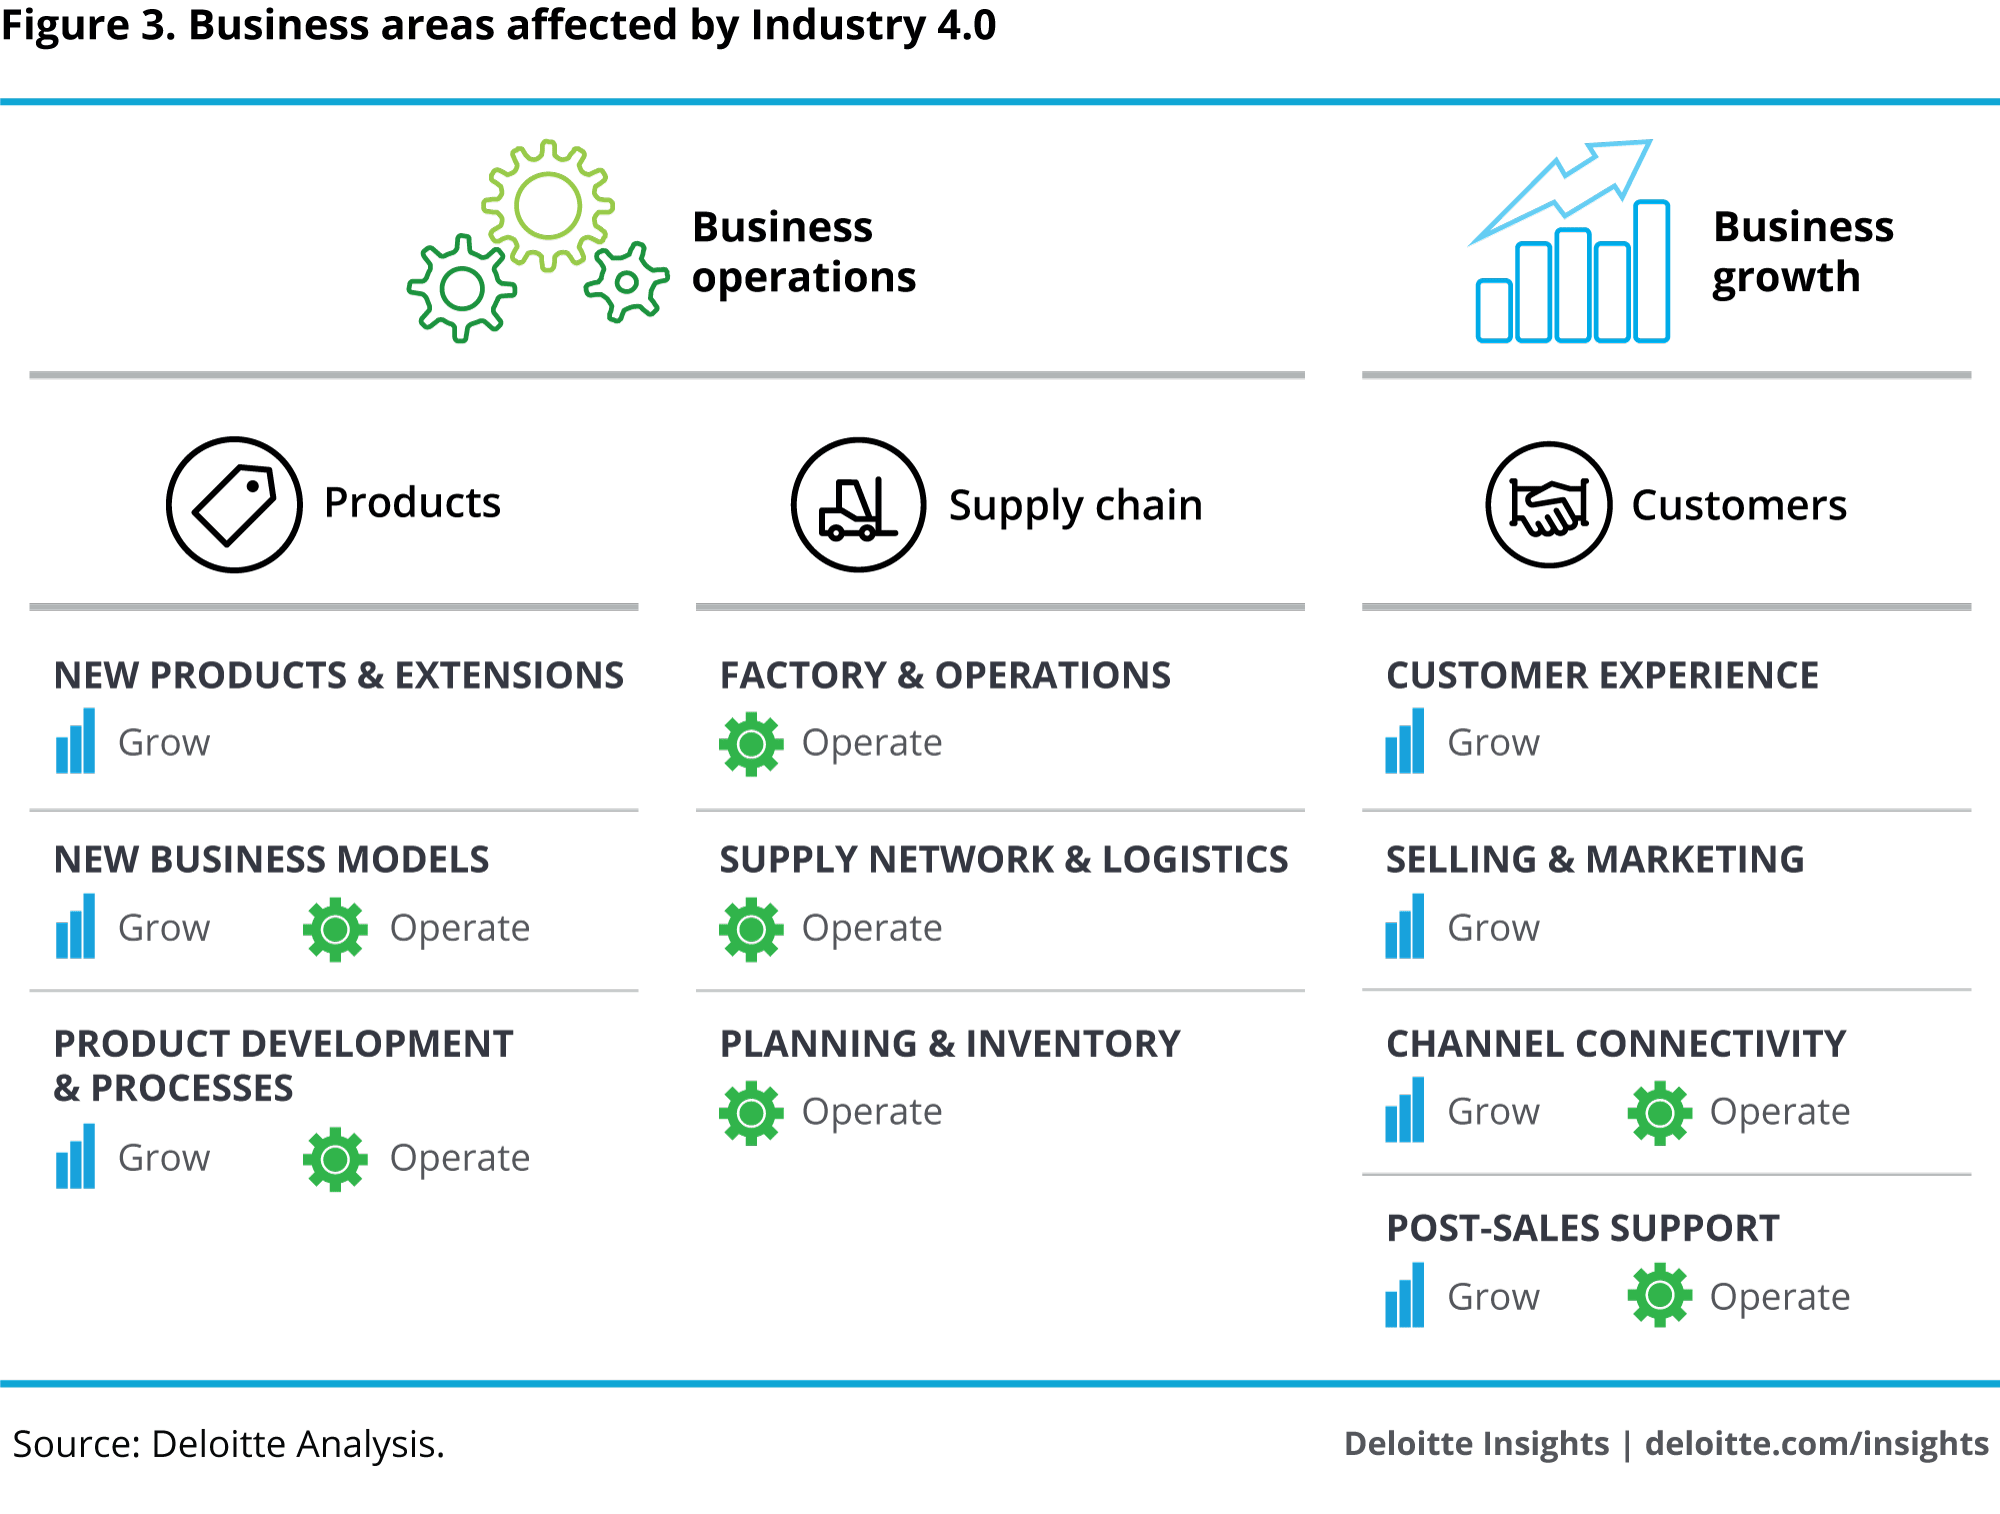 Business areas affected by Industry 4.0